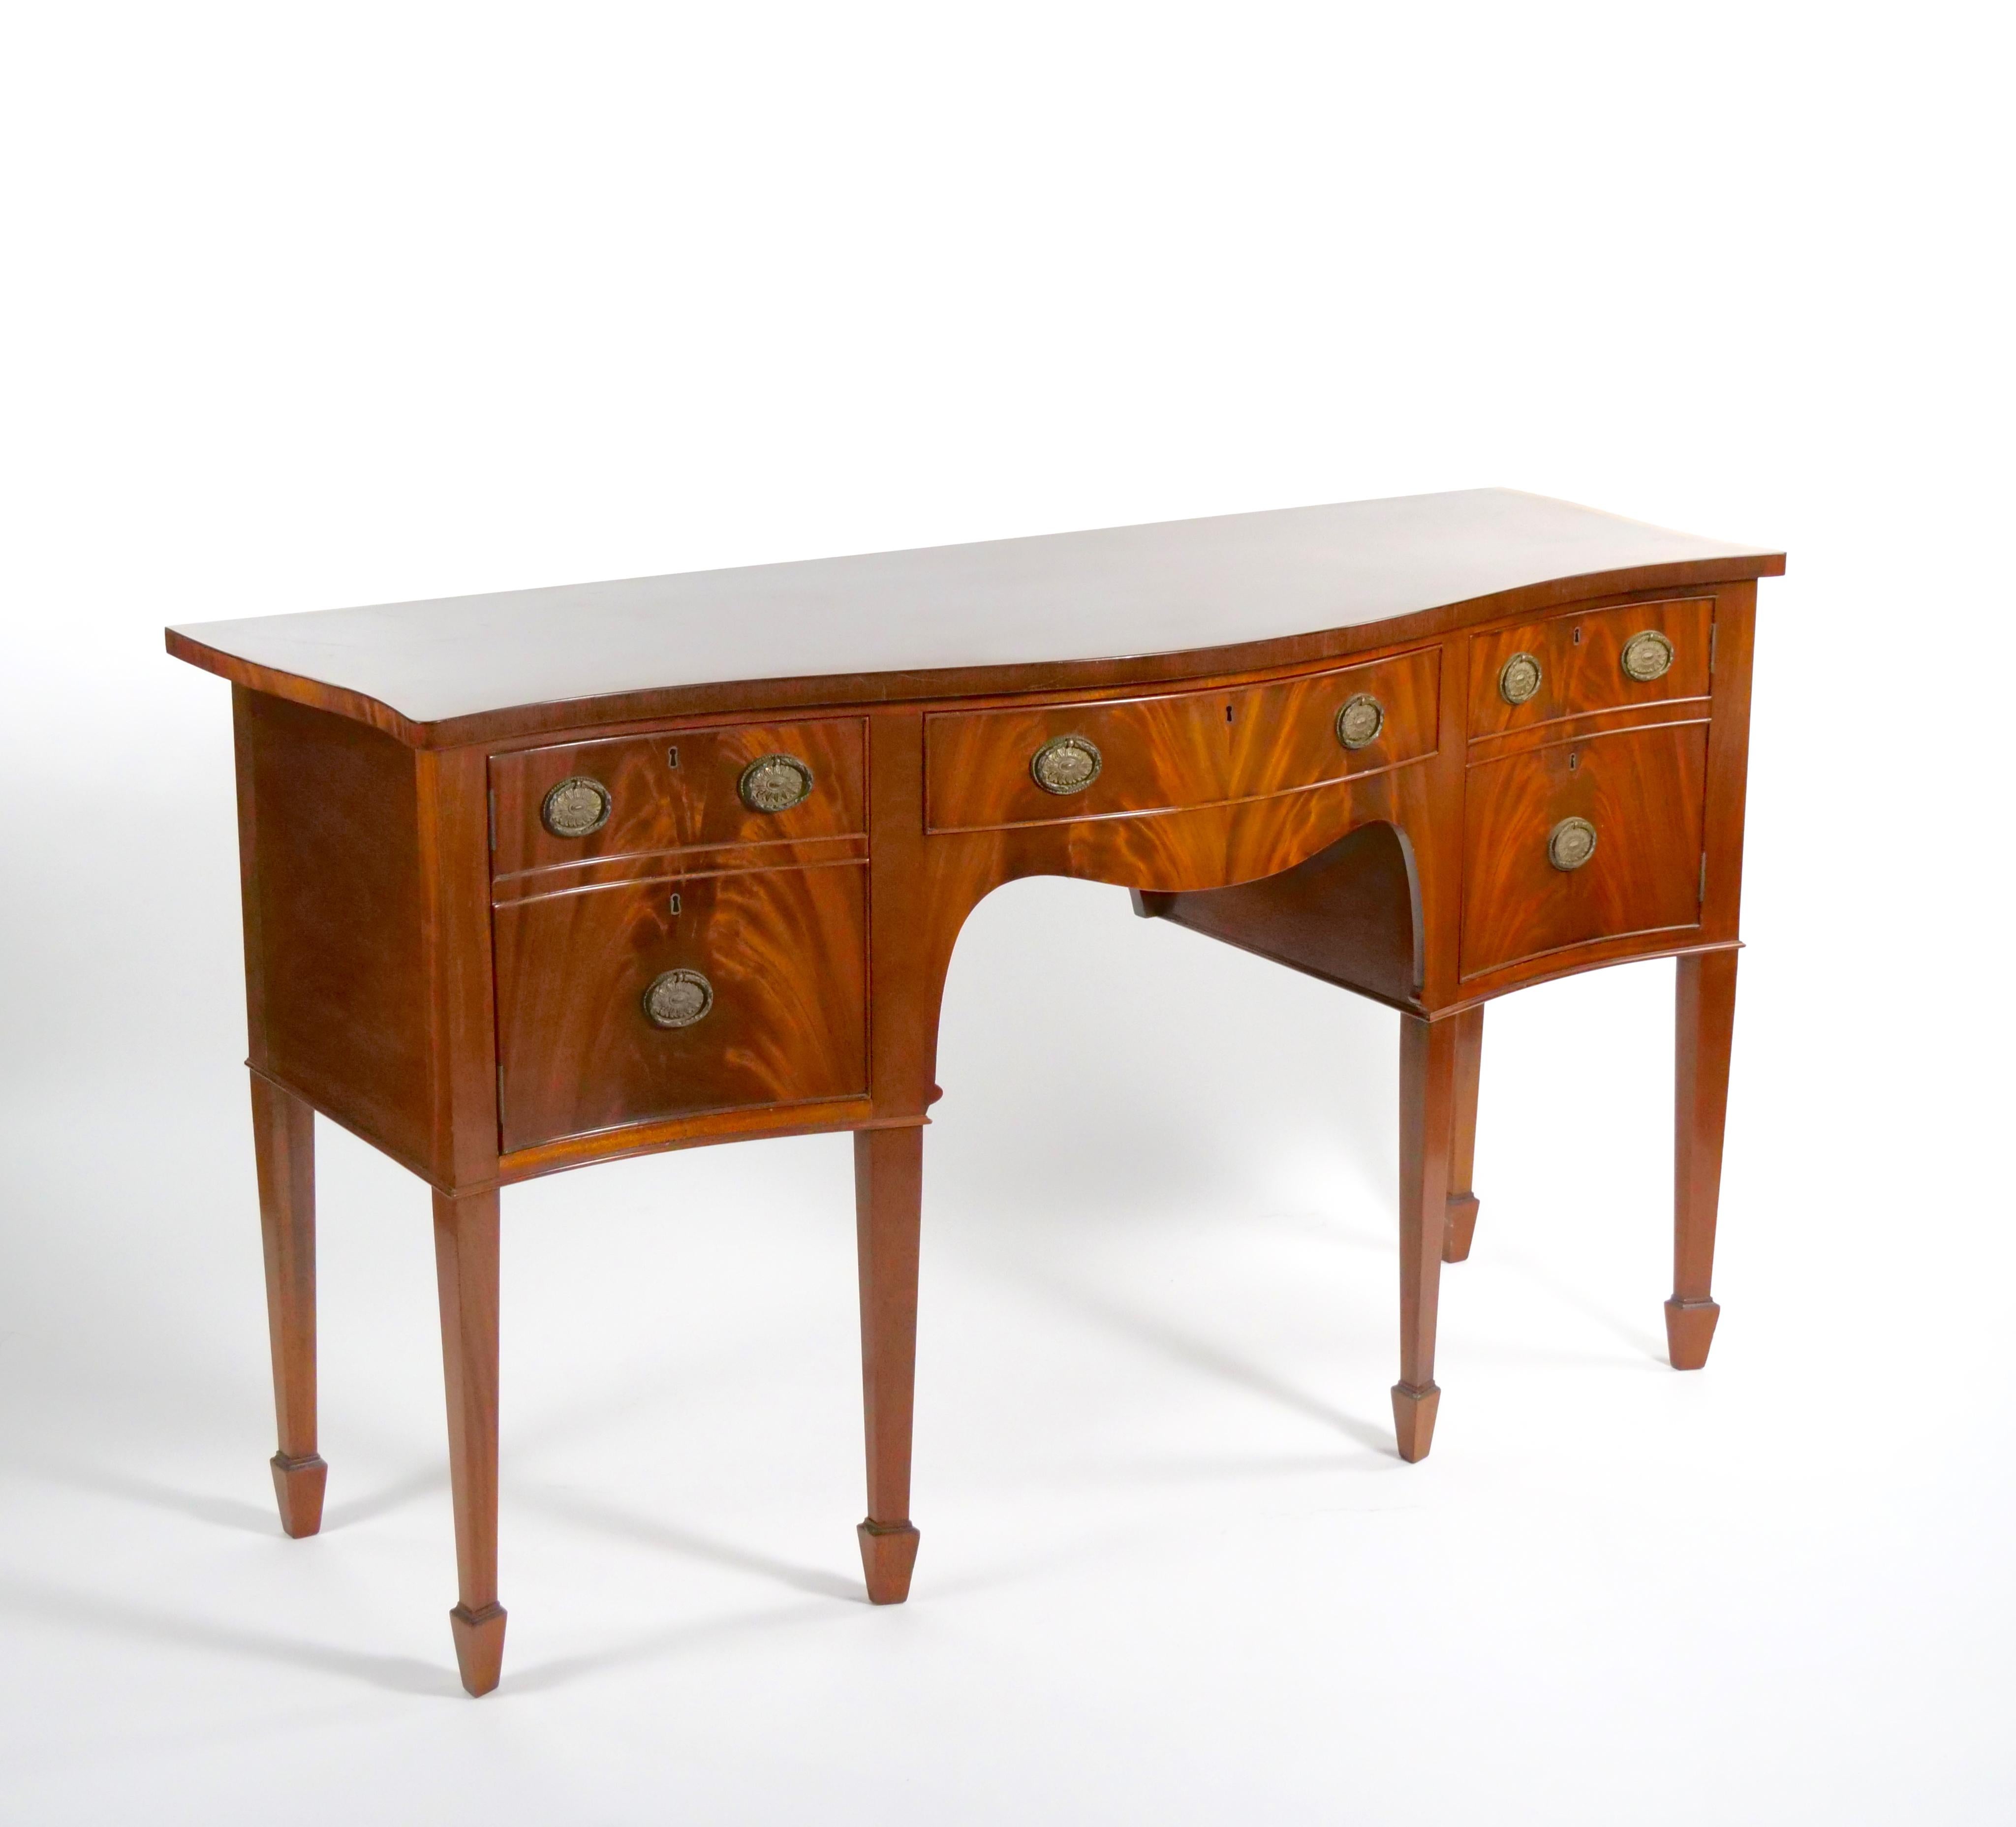 European Early 20th Century George III Flame Mahogany Serpentine Sideboard / Server For Sale